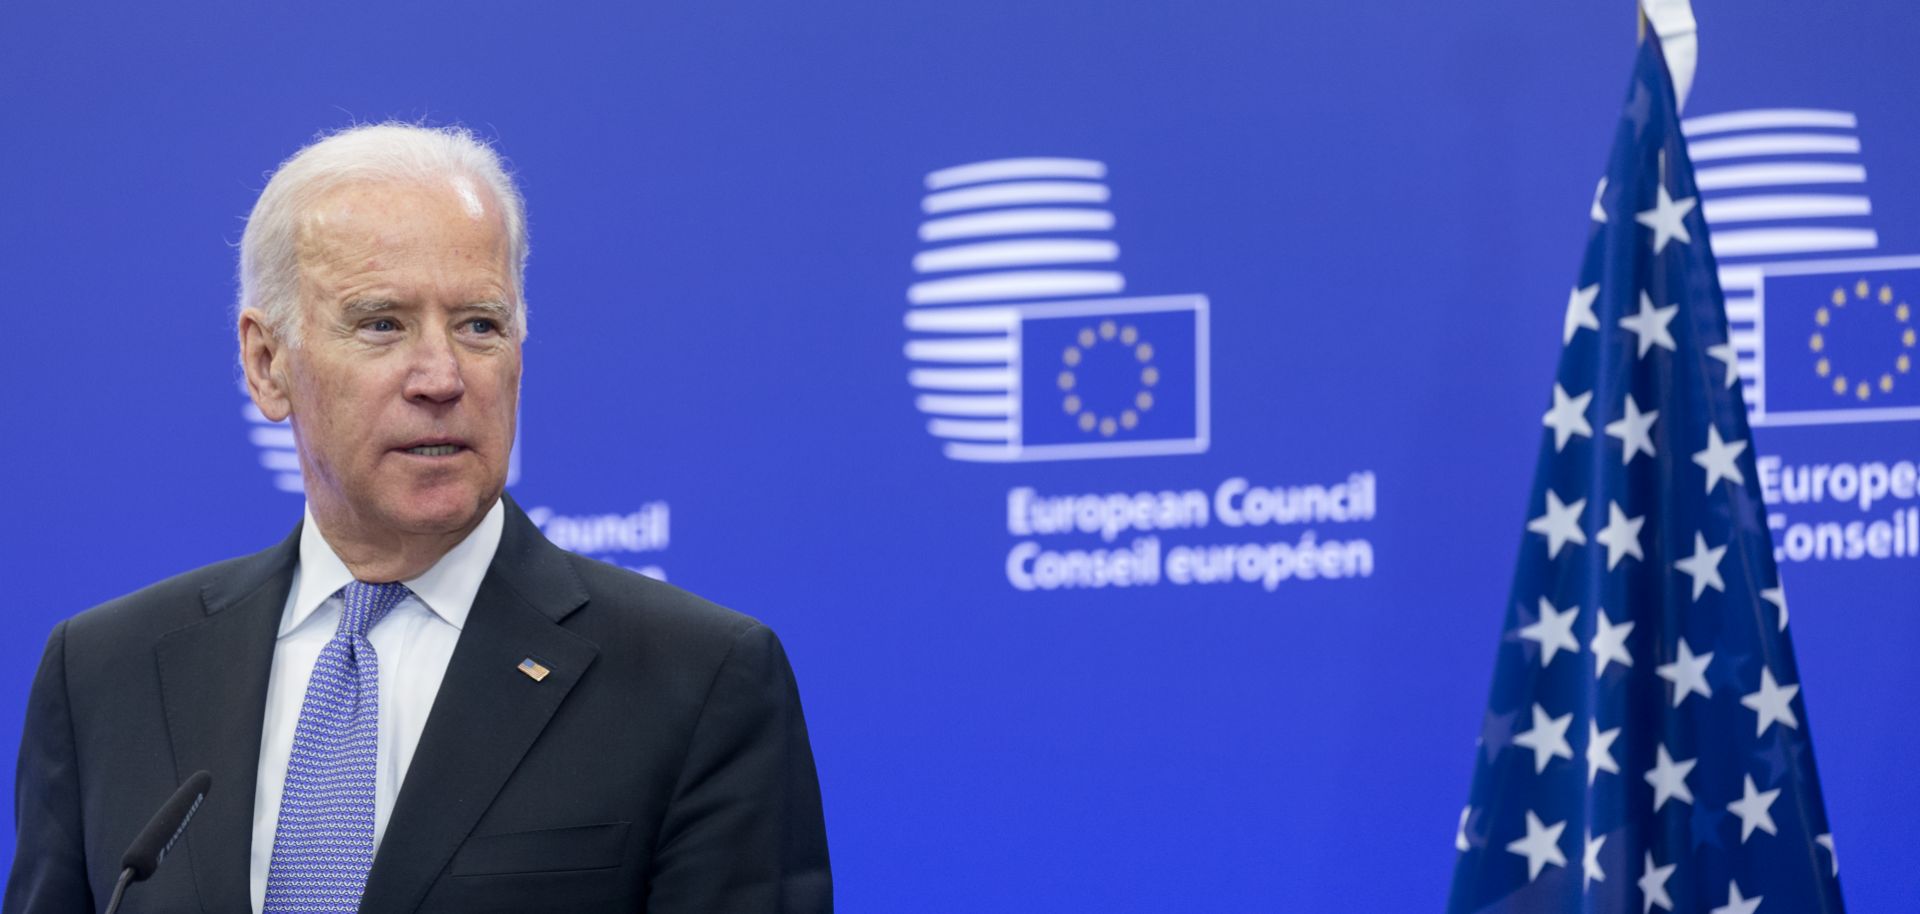 Then-U.S. Vice President Joe Biden participates in a bilateral meeting at the European Council headquarters in Brussels, Belgium, on Feb. 6, 2015.